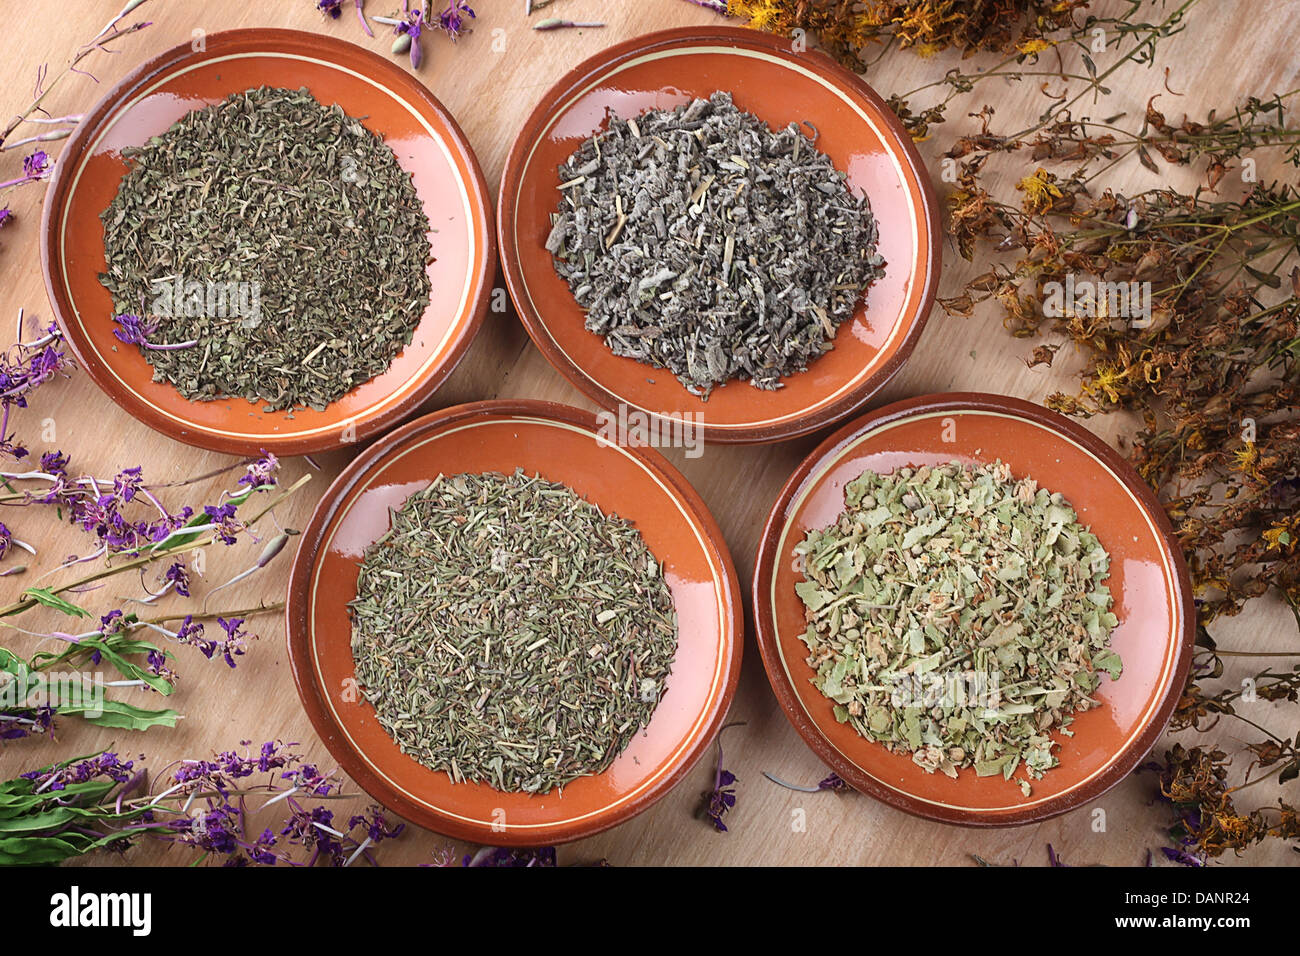 Medicinal herbs in clay saucers on wooden table Stock Photo